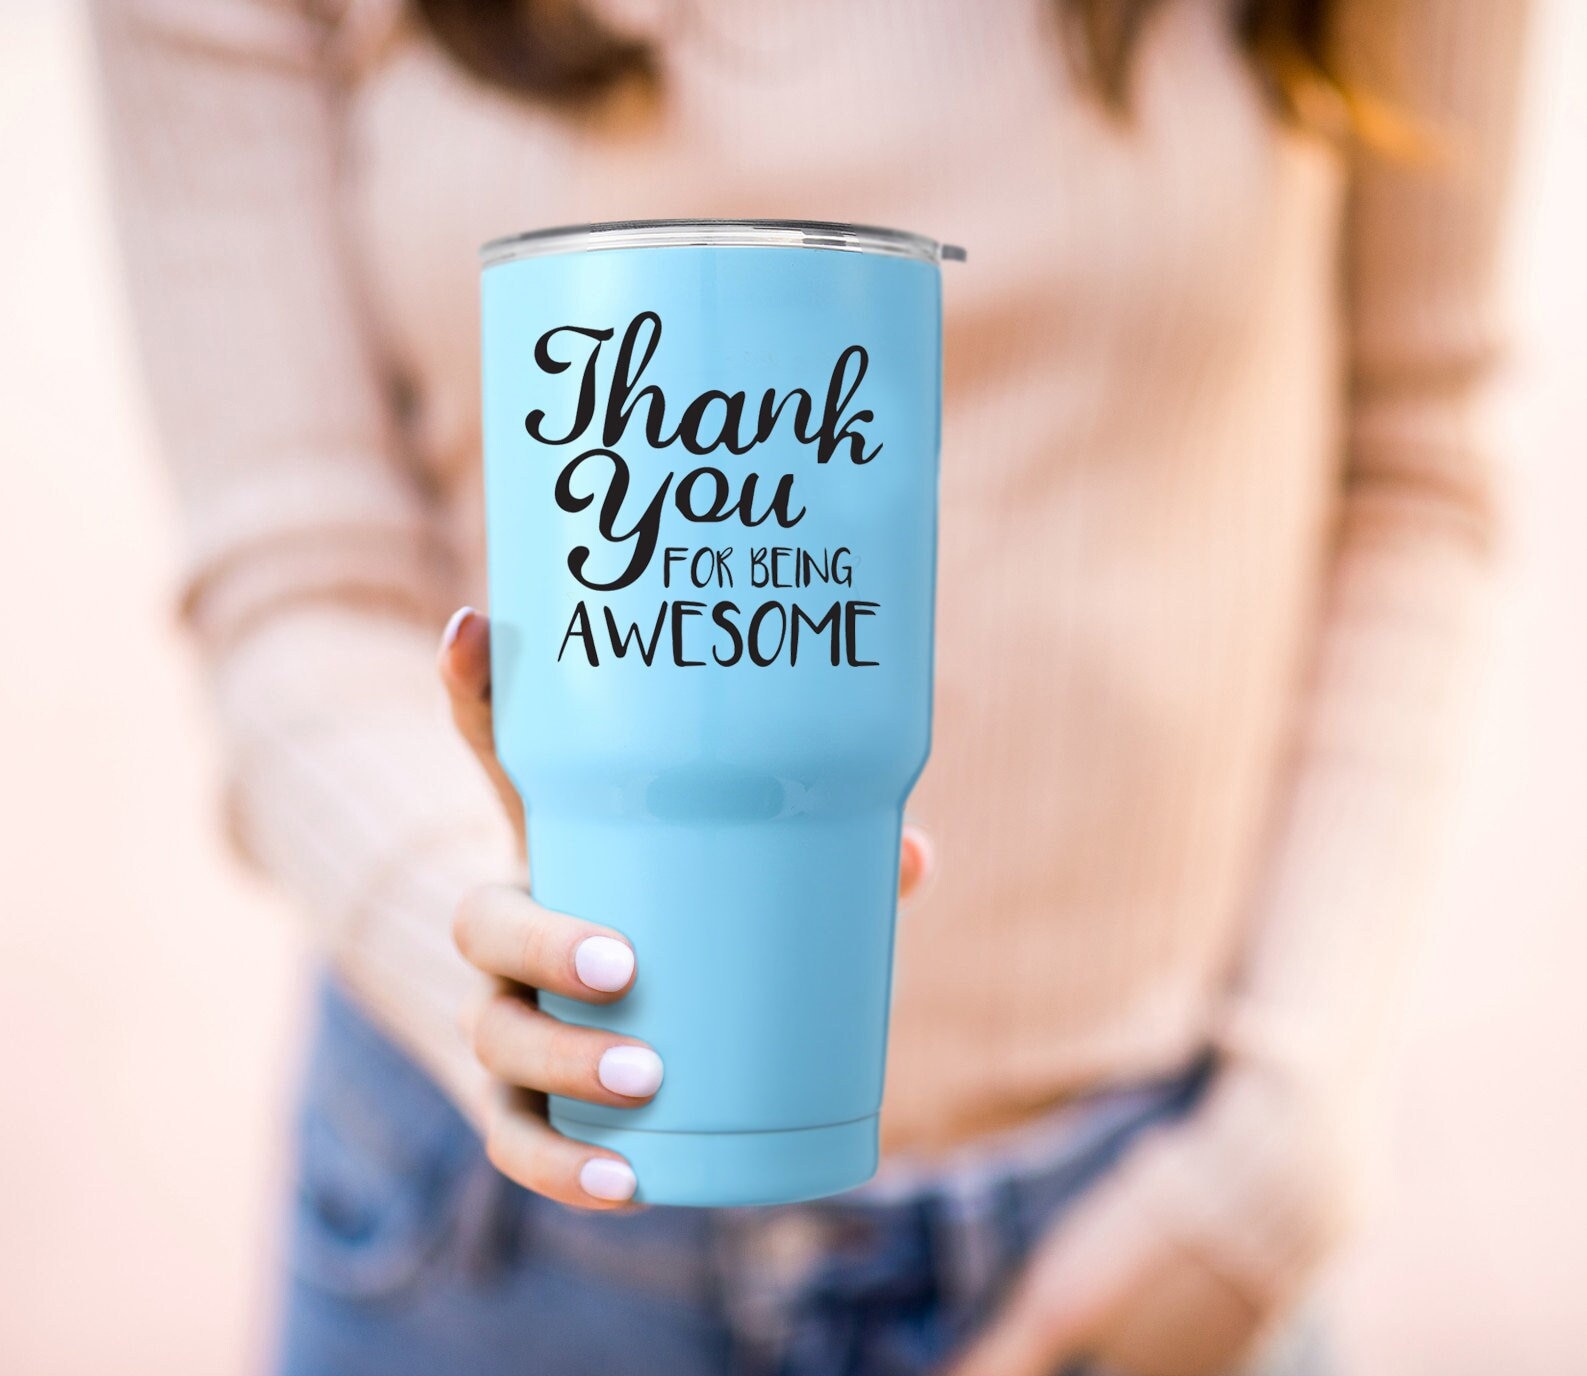 Tioncy 12 Pack Thank You Gifts Employee Appreciation Gifts Bulk 12 oz  Ceramic Coffee Mugs with Spoon…See more Tioncy 12 Pack Thank You Gifts  Employee